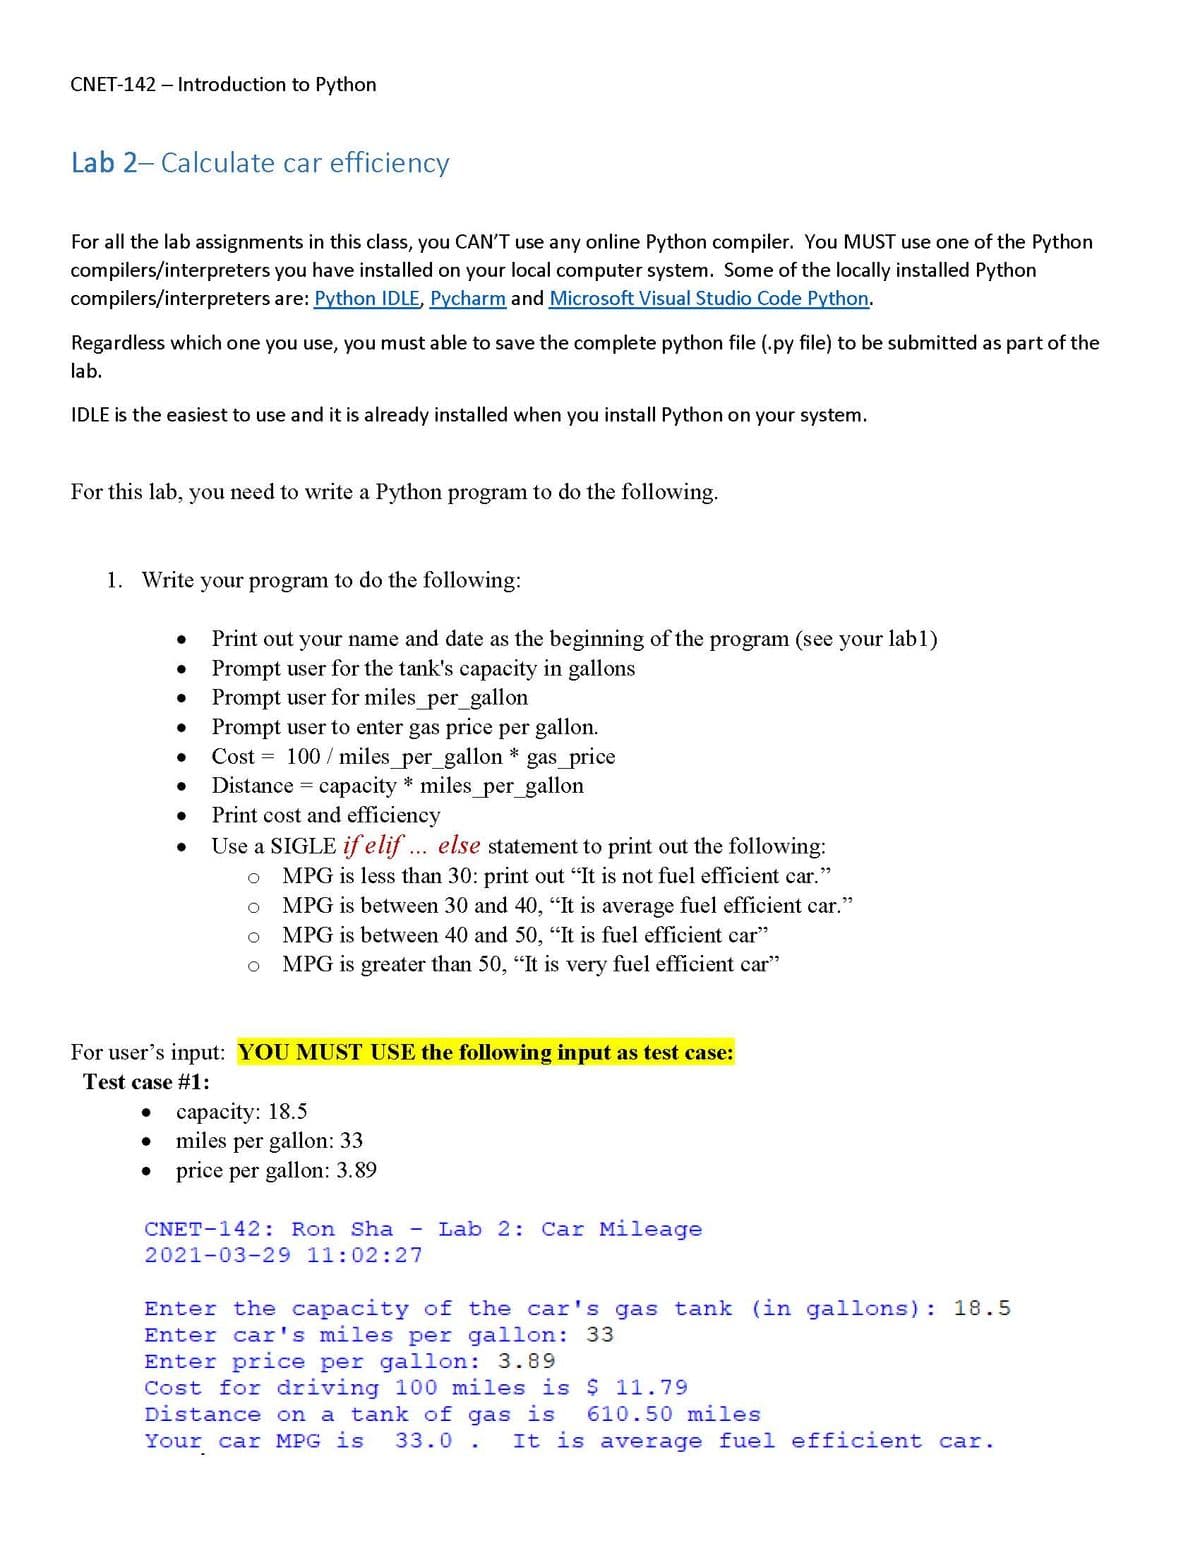 CNET-142 - Introduction to Python
Lab 2- Calculate car efficiency
For all the lab assignments in this class, you CAN'T use any online Python compiler. You MUST use one of the Python
compilers/interpreters you have installed on your local computer system. Some of the locally installed Python
compilers/interpreters are: Python IDLE, Pycharm and Microsoft Visual Studio Code Python.
Regardless which one you use, you must able to save the complete python file (.py file) to be submitted as part of the
lab.
IDLE is the easiest to use and it is already installed when you install Python on your system.
For this lab, you need to write a Python program to do the following.
1. Write your program to do the following:
●
●
●
●
●
●
●
Print out your name and date as the beginning of the program (see your lab1)
Prompt user for the tank's capacity in gallons
Prompt user for miles_per_gallon
Prompt user to enter gas price per gallon.
Cost 100 miles_per_gallon * gas_price
Distance
capacity * miles_per_gallon
Print cost and efficiency
Use a SIGLE if elif... else statement to print out the following:
MPG is less than 30: print out "It is not fuel efficient car."
MPG is between 30 and 40, "It is average fuel efficient car."
MPG is between 40 and 50, "It is fuel efficient car"
MPG is greater than 50, "It is very fuel efficient car"
O
=
For user's input: YOU MUST USE the following input as test case:
Test case #1:
=
capacity: 18.5
miles per gallon: 33
price per gallon: 3.89
CNET-142: Ron Sha Lab 2: Car Mileage
2021-03-29 11:02:27
Enter the capacity of the car's gas tank (in gallons): 18.5
Enter car's miles per gallon: 33
Enter price per gallon: 3.89
Cost for driving 100 miles is $11.79
Distance on a tank of gas is
Your car MPG is 33.0. It is average fuel efficient car.
610.50 miles